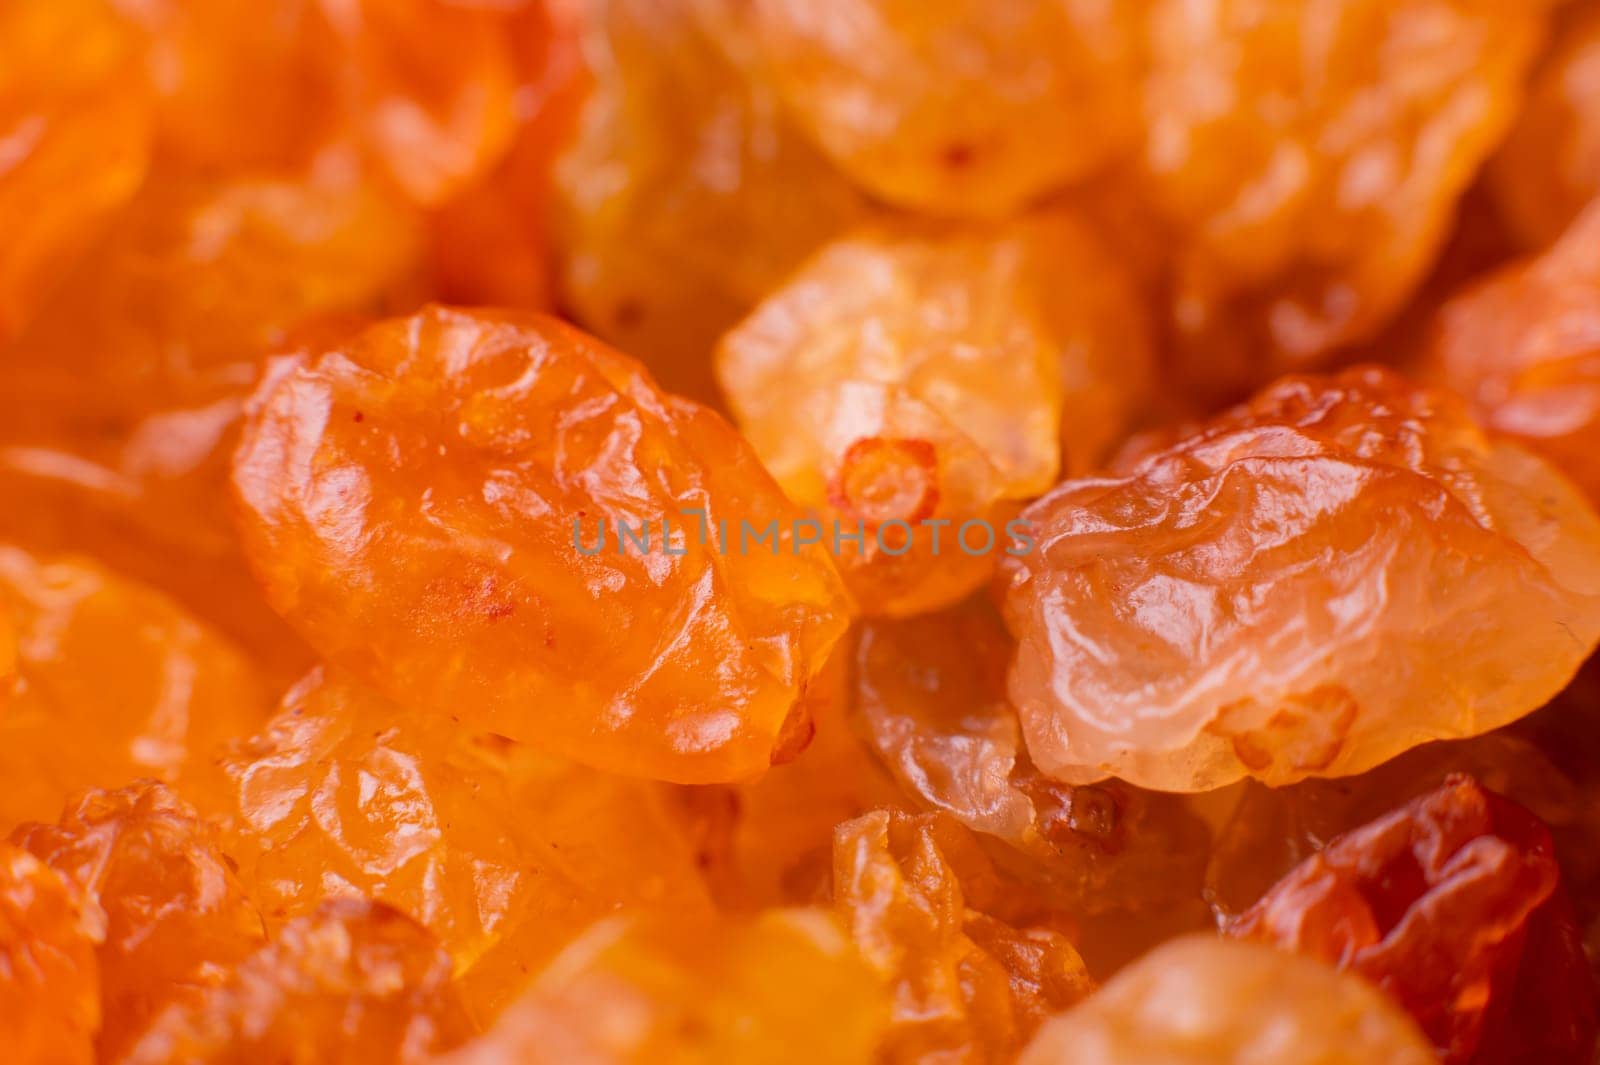 Background of a large number of dried yellow golden grapes. Raisin. Vegetarian diet by yanik88